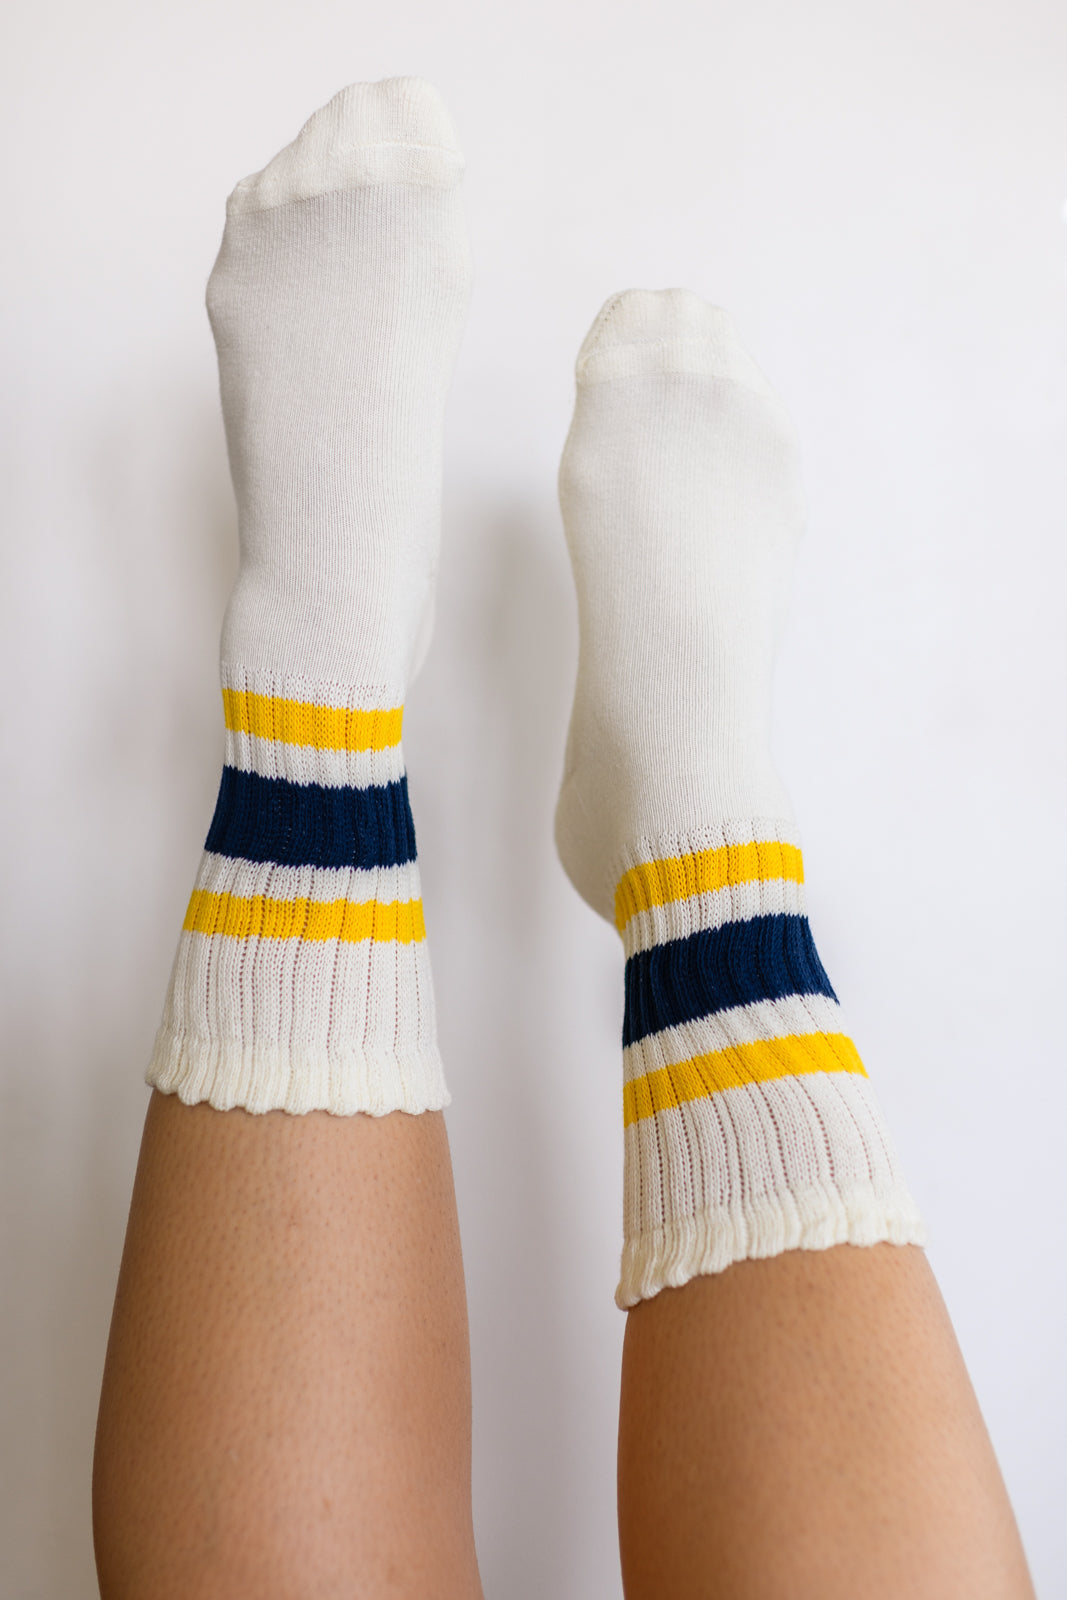 World's Best Dad Socks in Navy and Yellow